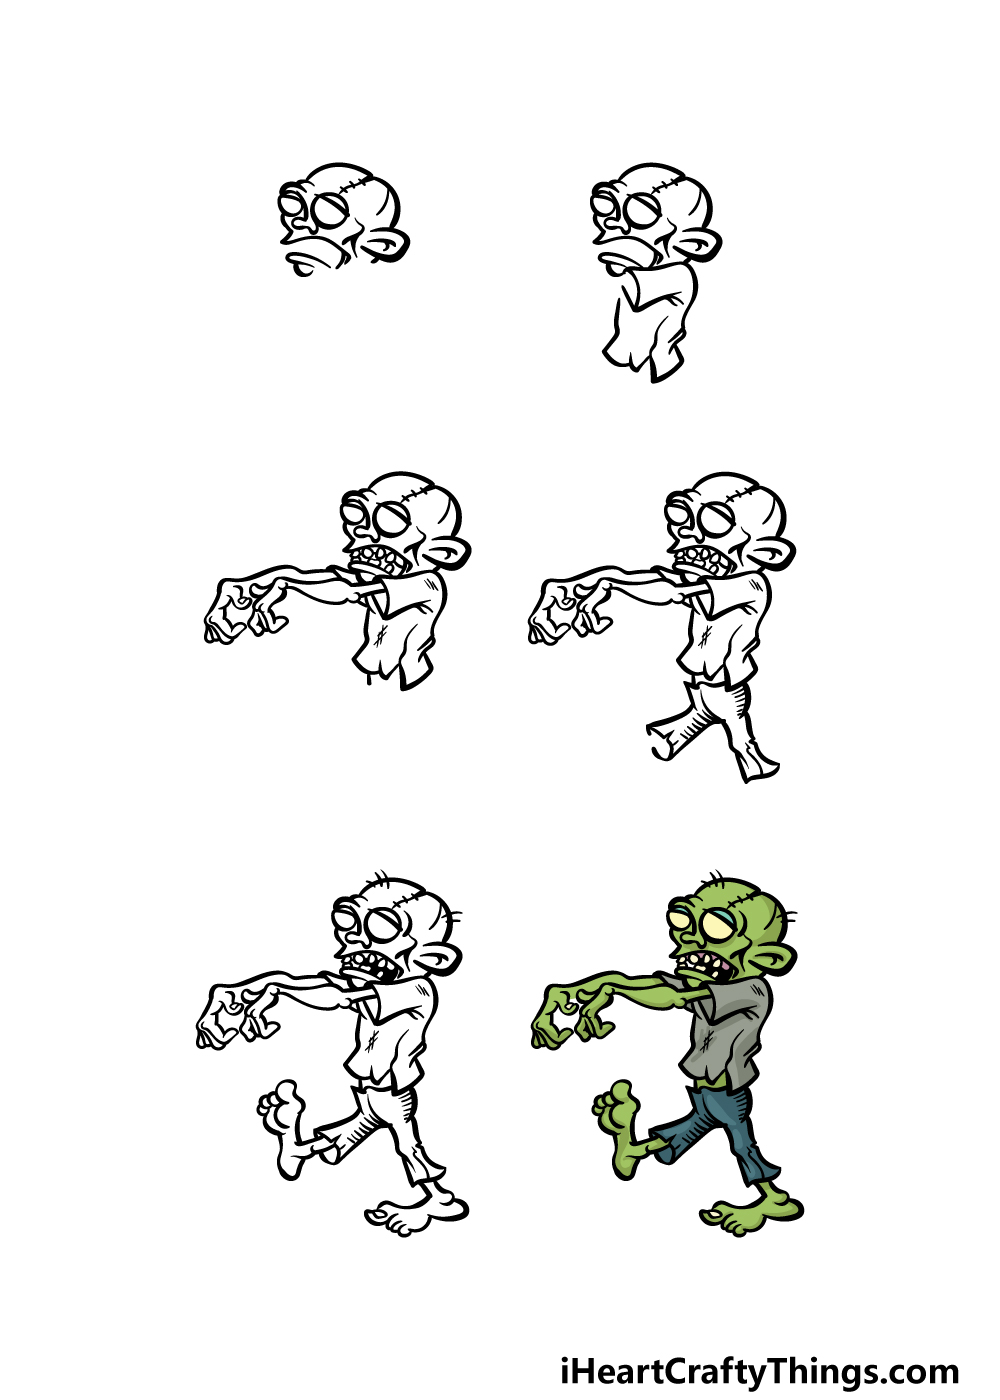 how to draw a cartoon zombie in 6 steps